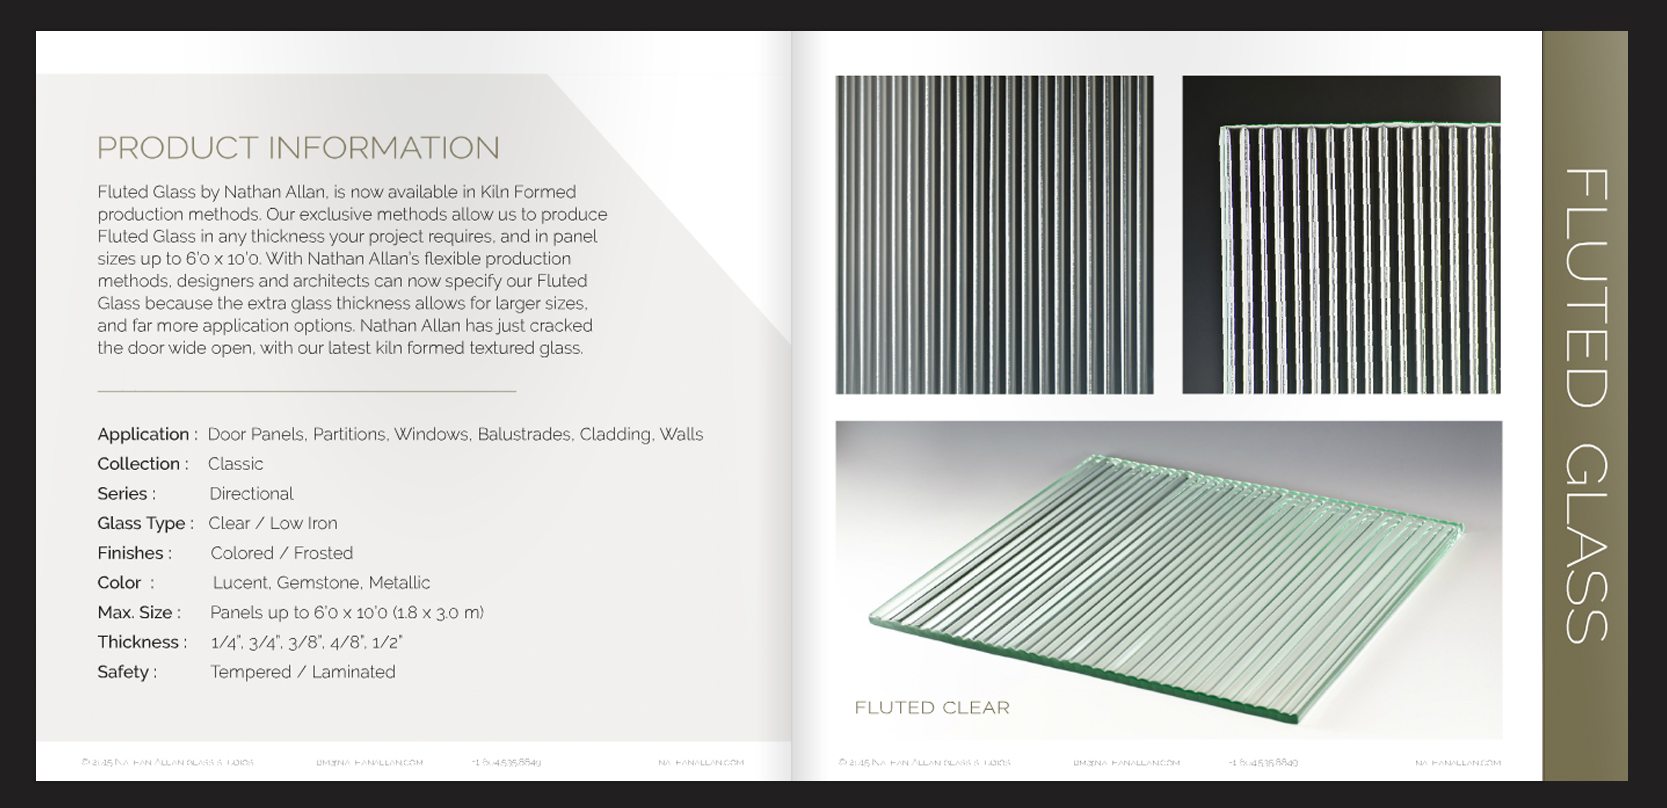 Introducing Fluted Glass